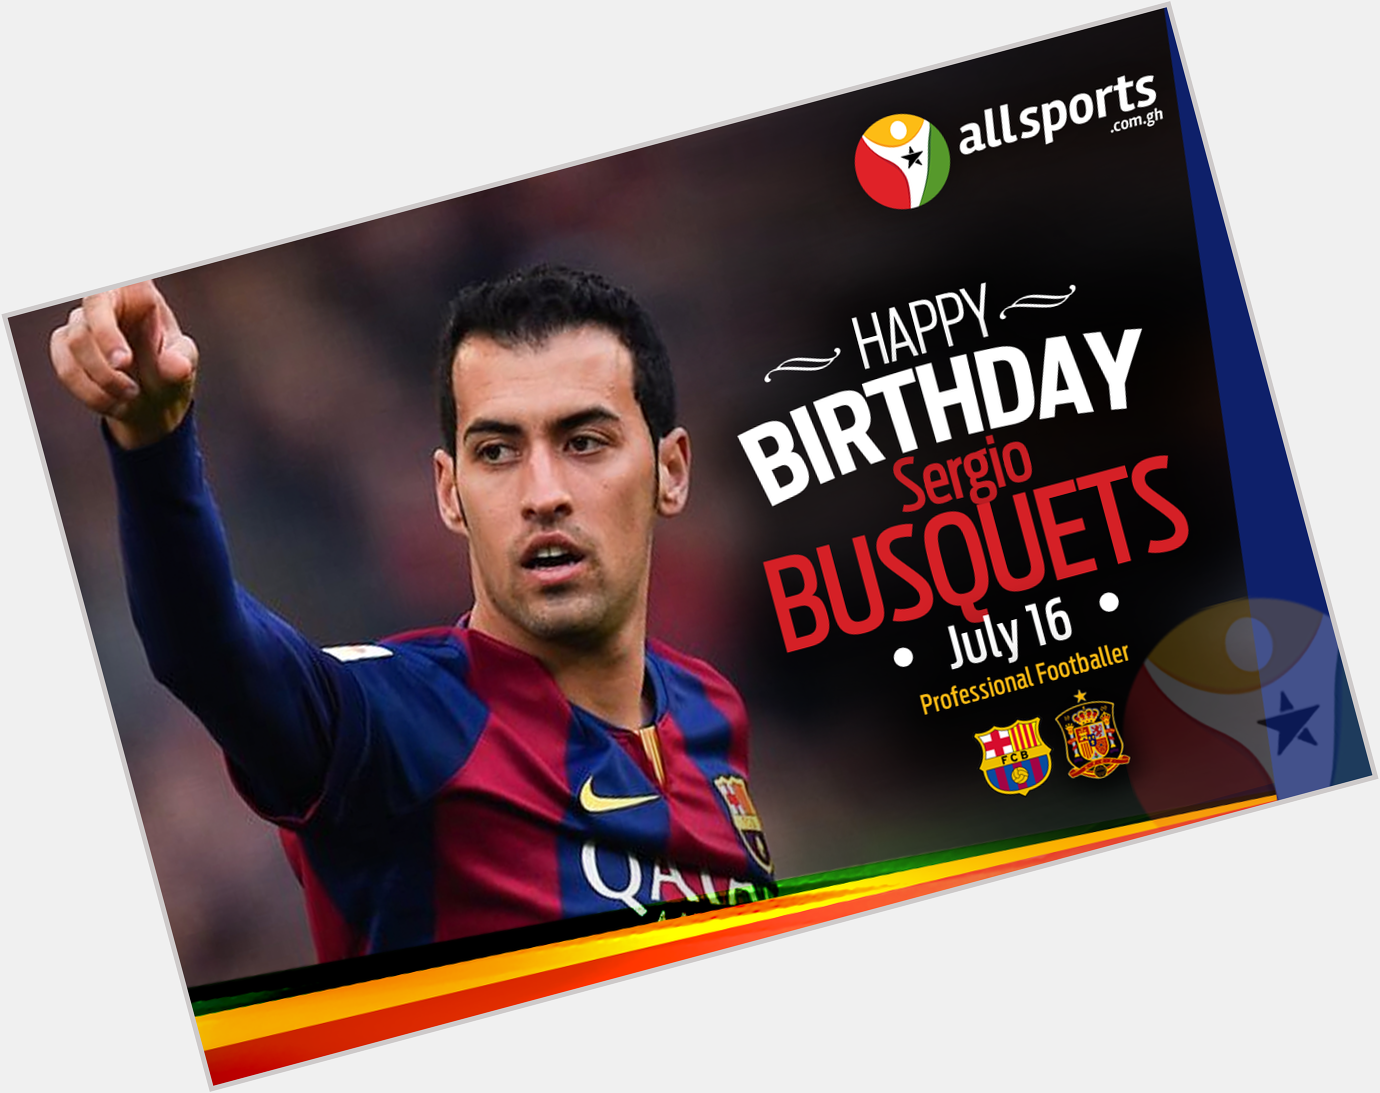 AllSportsGh wishes Spanish midfielder Sergio Busquets of a HAPPY BIRTHDAY as he turns 27 years today 